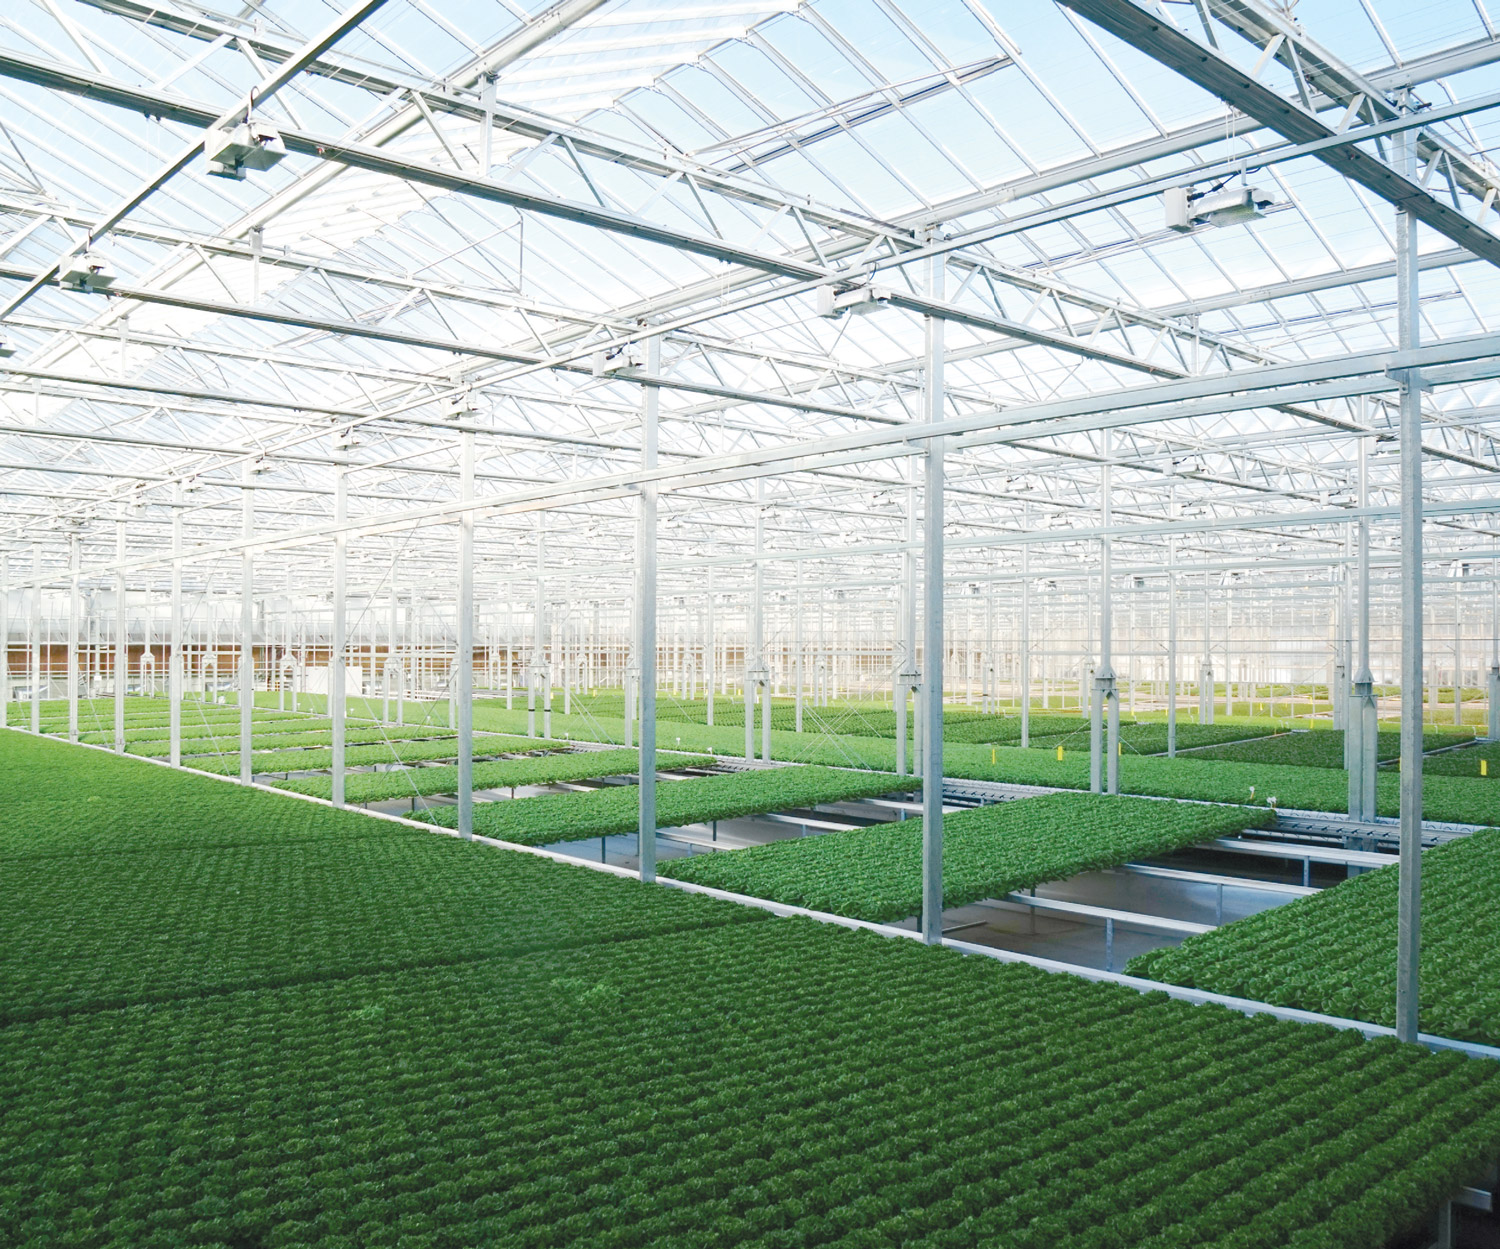 Gotham Greens opens second greenhouse in rapidly redeveloping